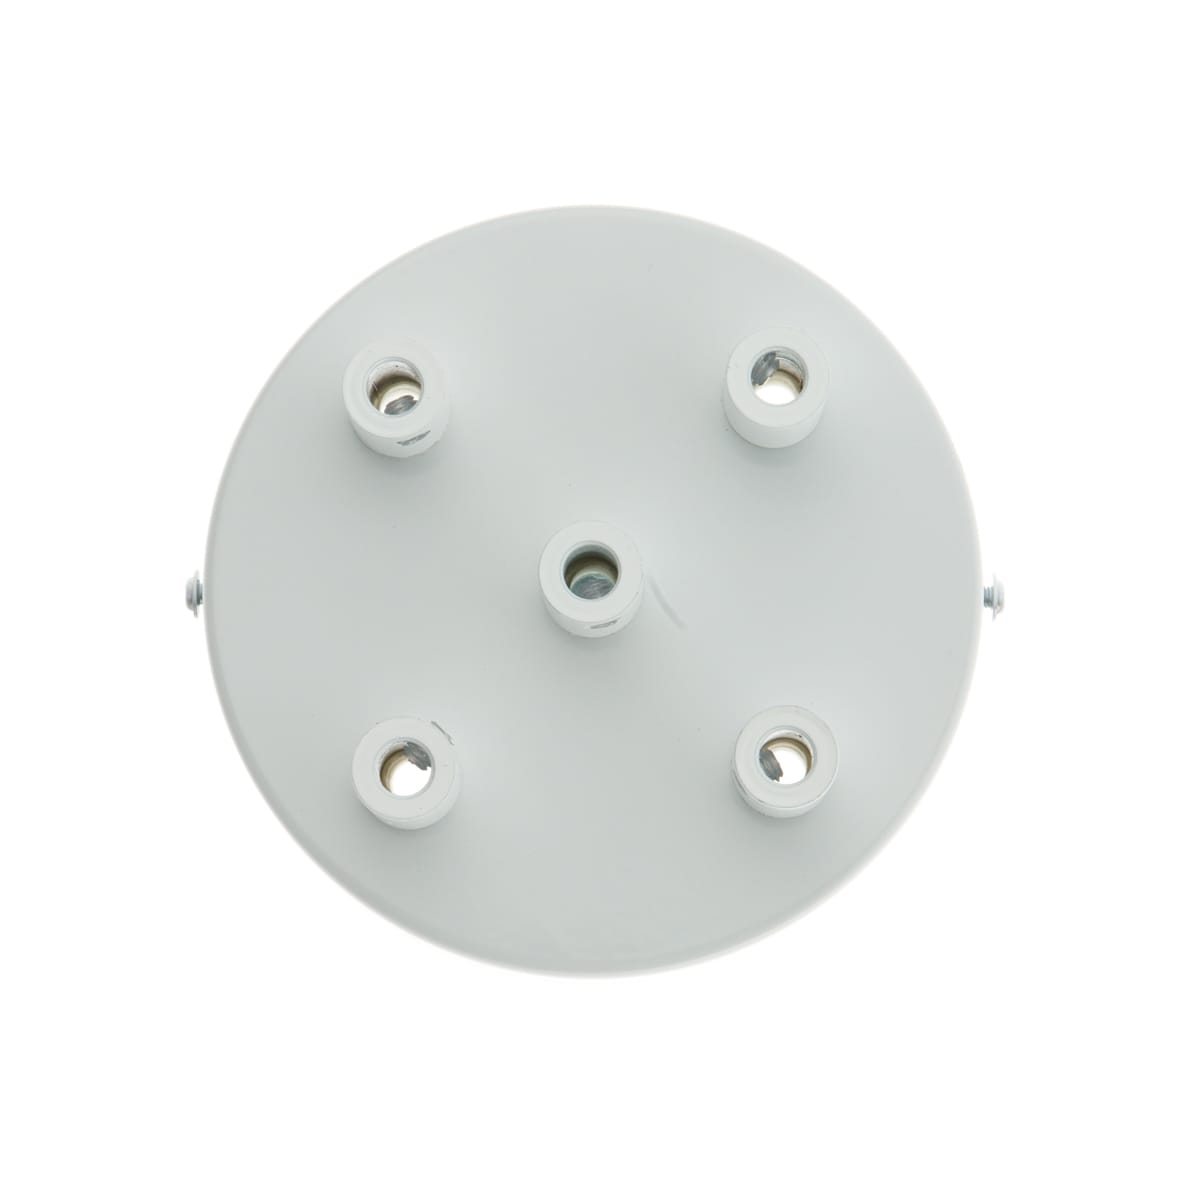 5-Port Ceiling Canopy - On Sale